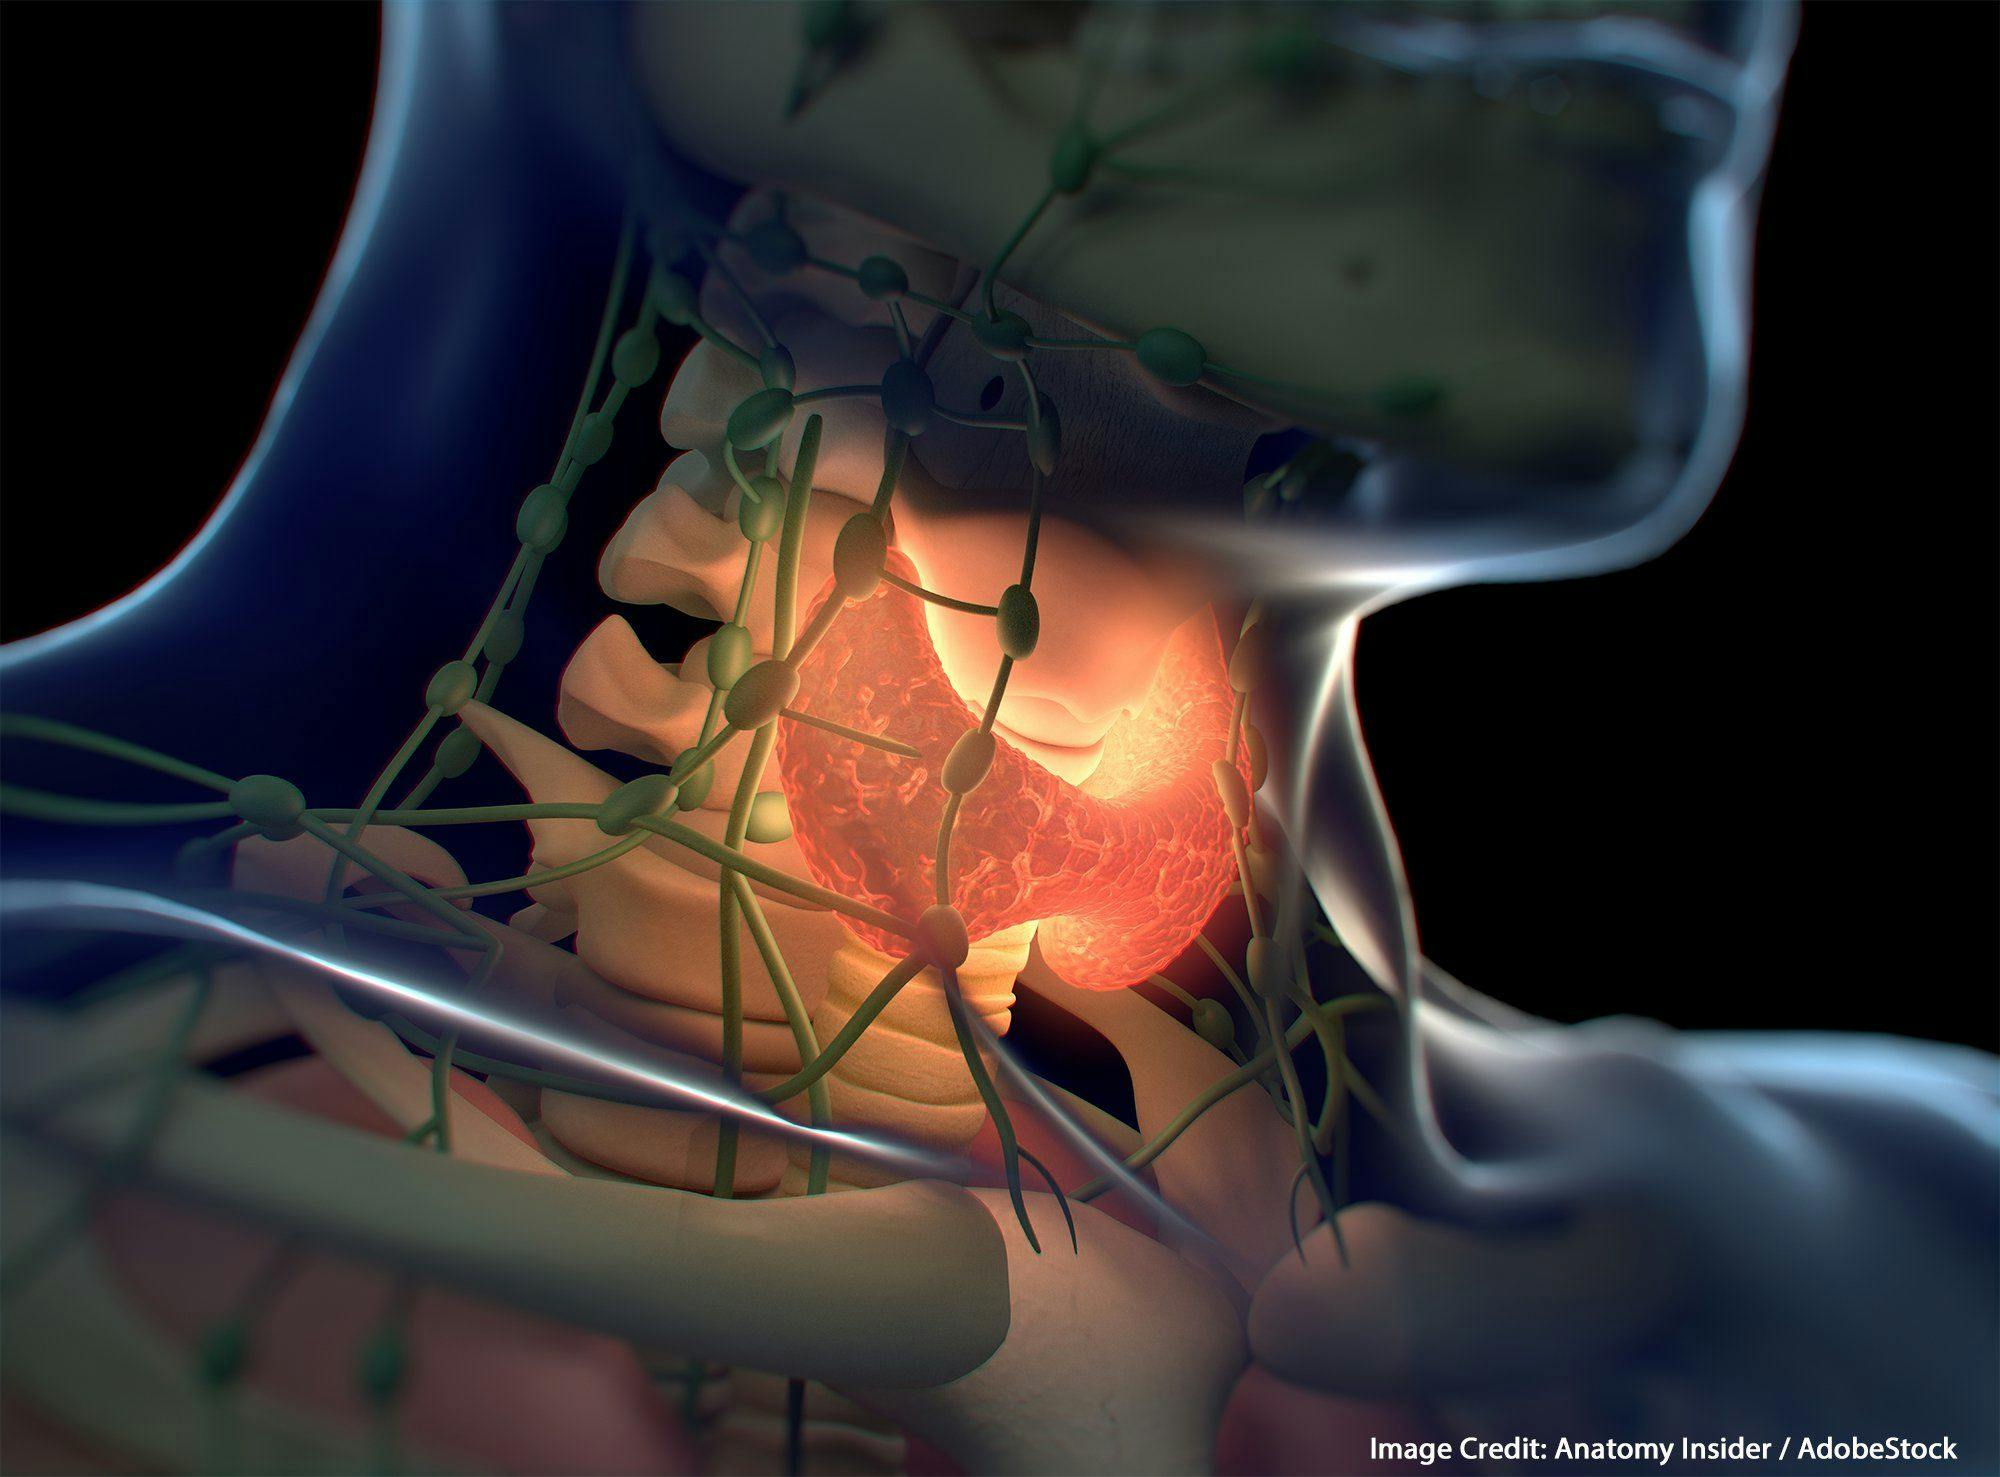 Hemithyroidectomy Rates Increase Following Guideline Change